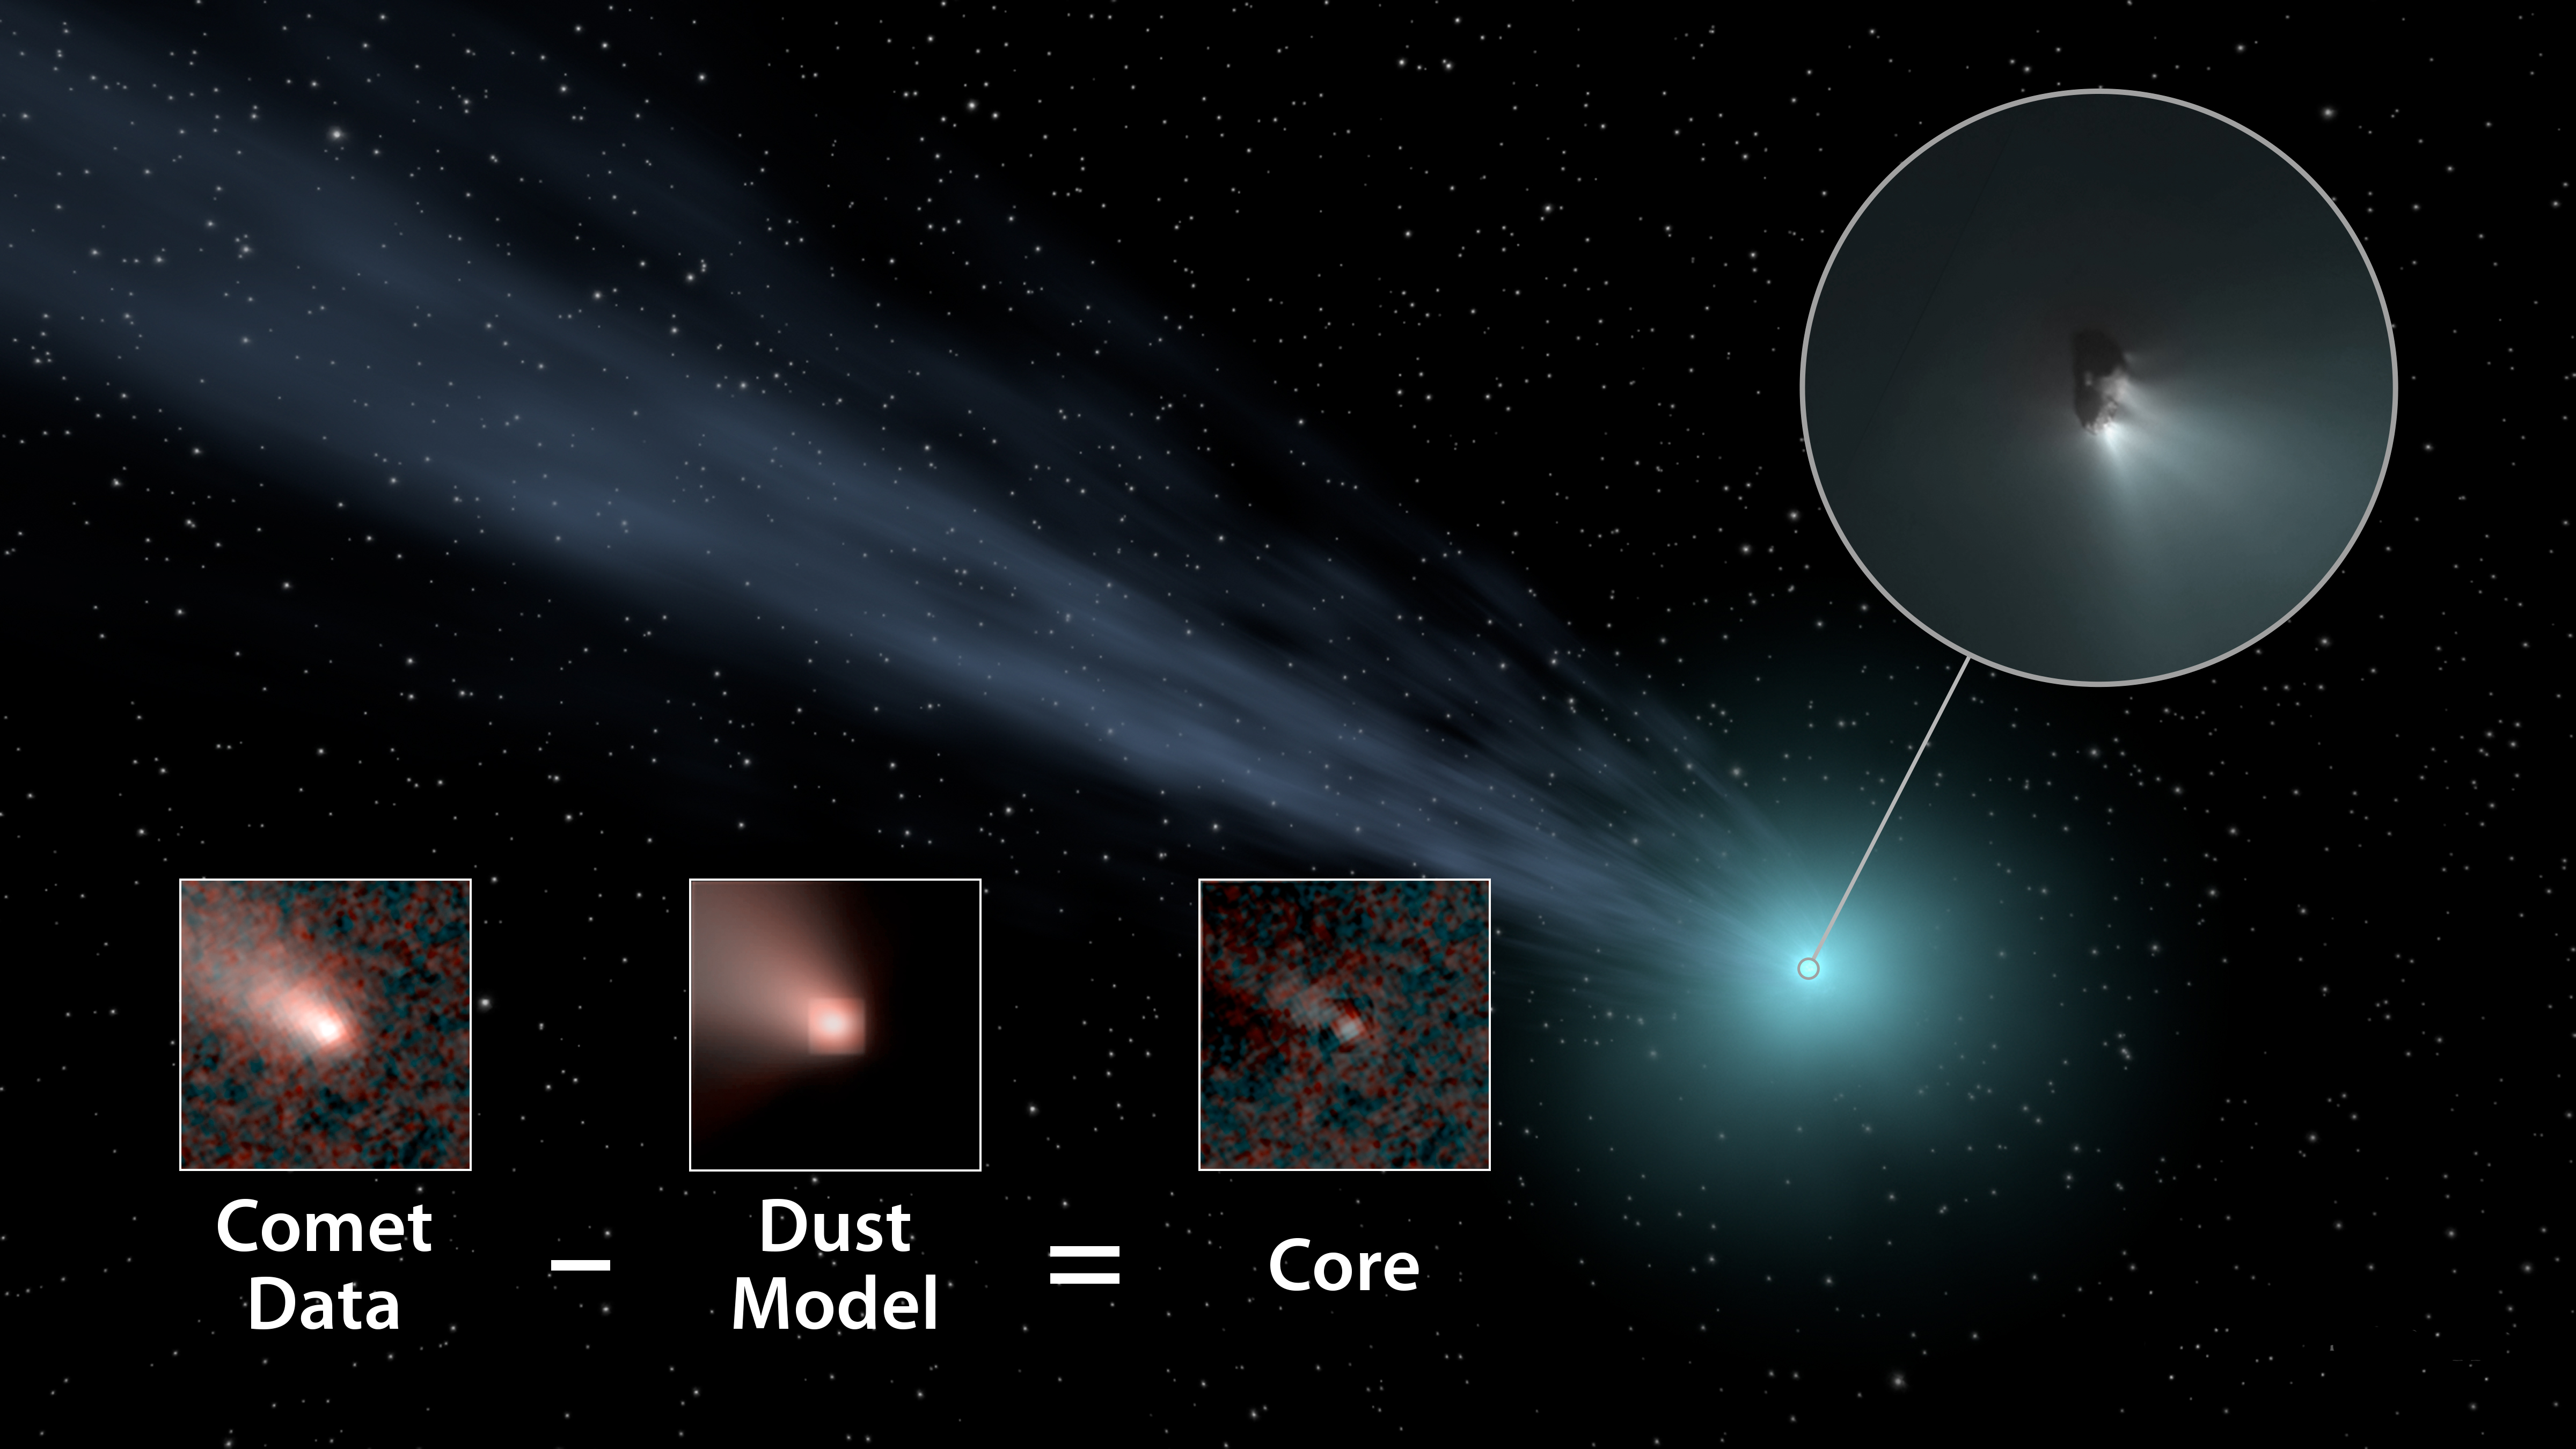 Large, Distant Comets More Common Than Previously Thought | NASA